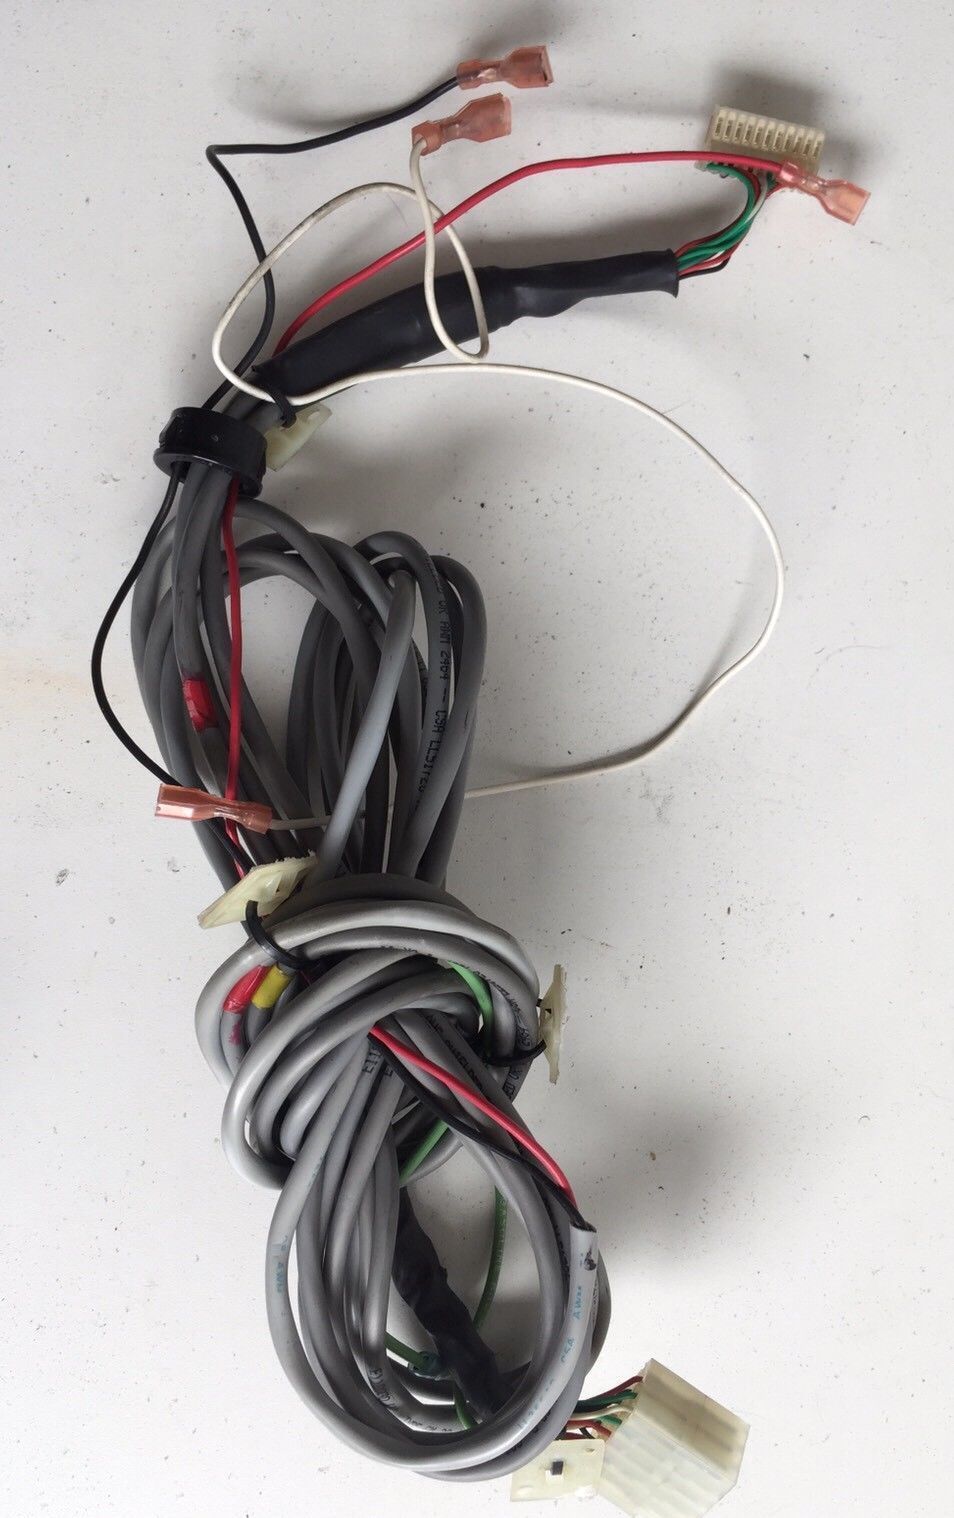 True Fitness Treadmill Wire Harness Upper to Lower 500 SE 500se 500s Data Cable (Used)